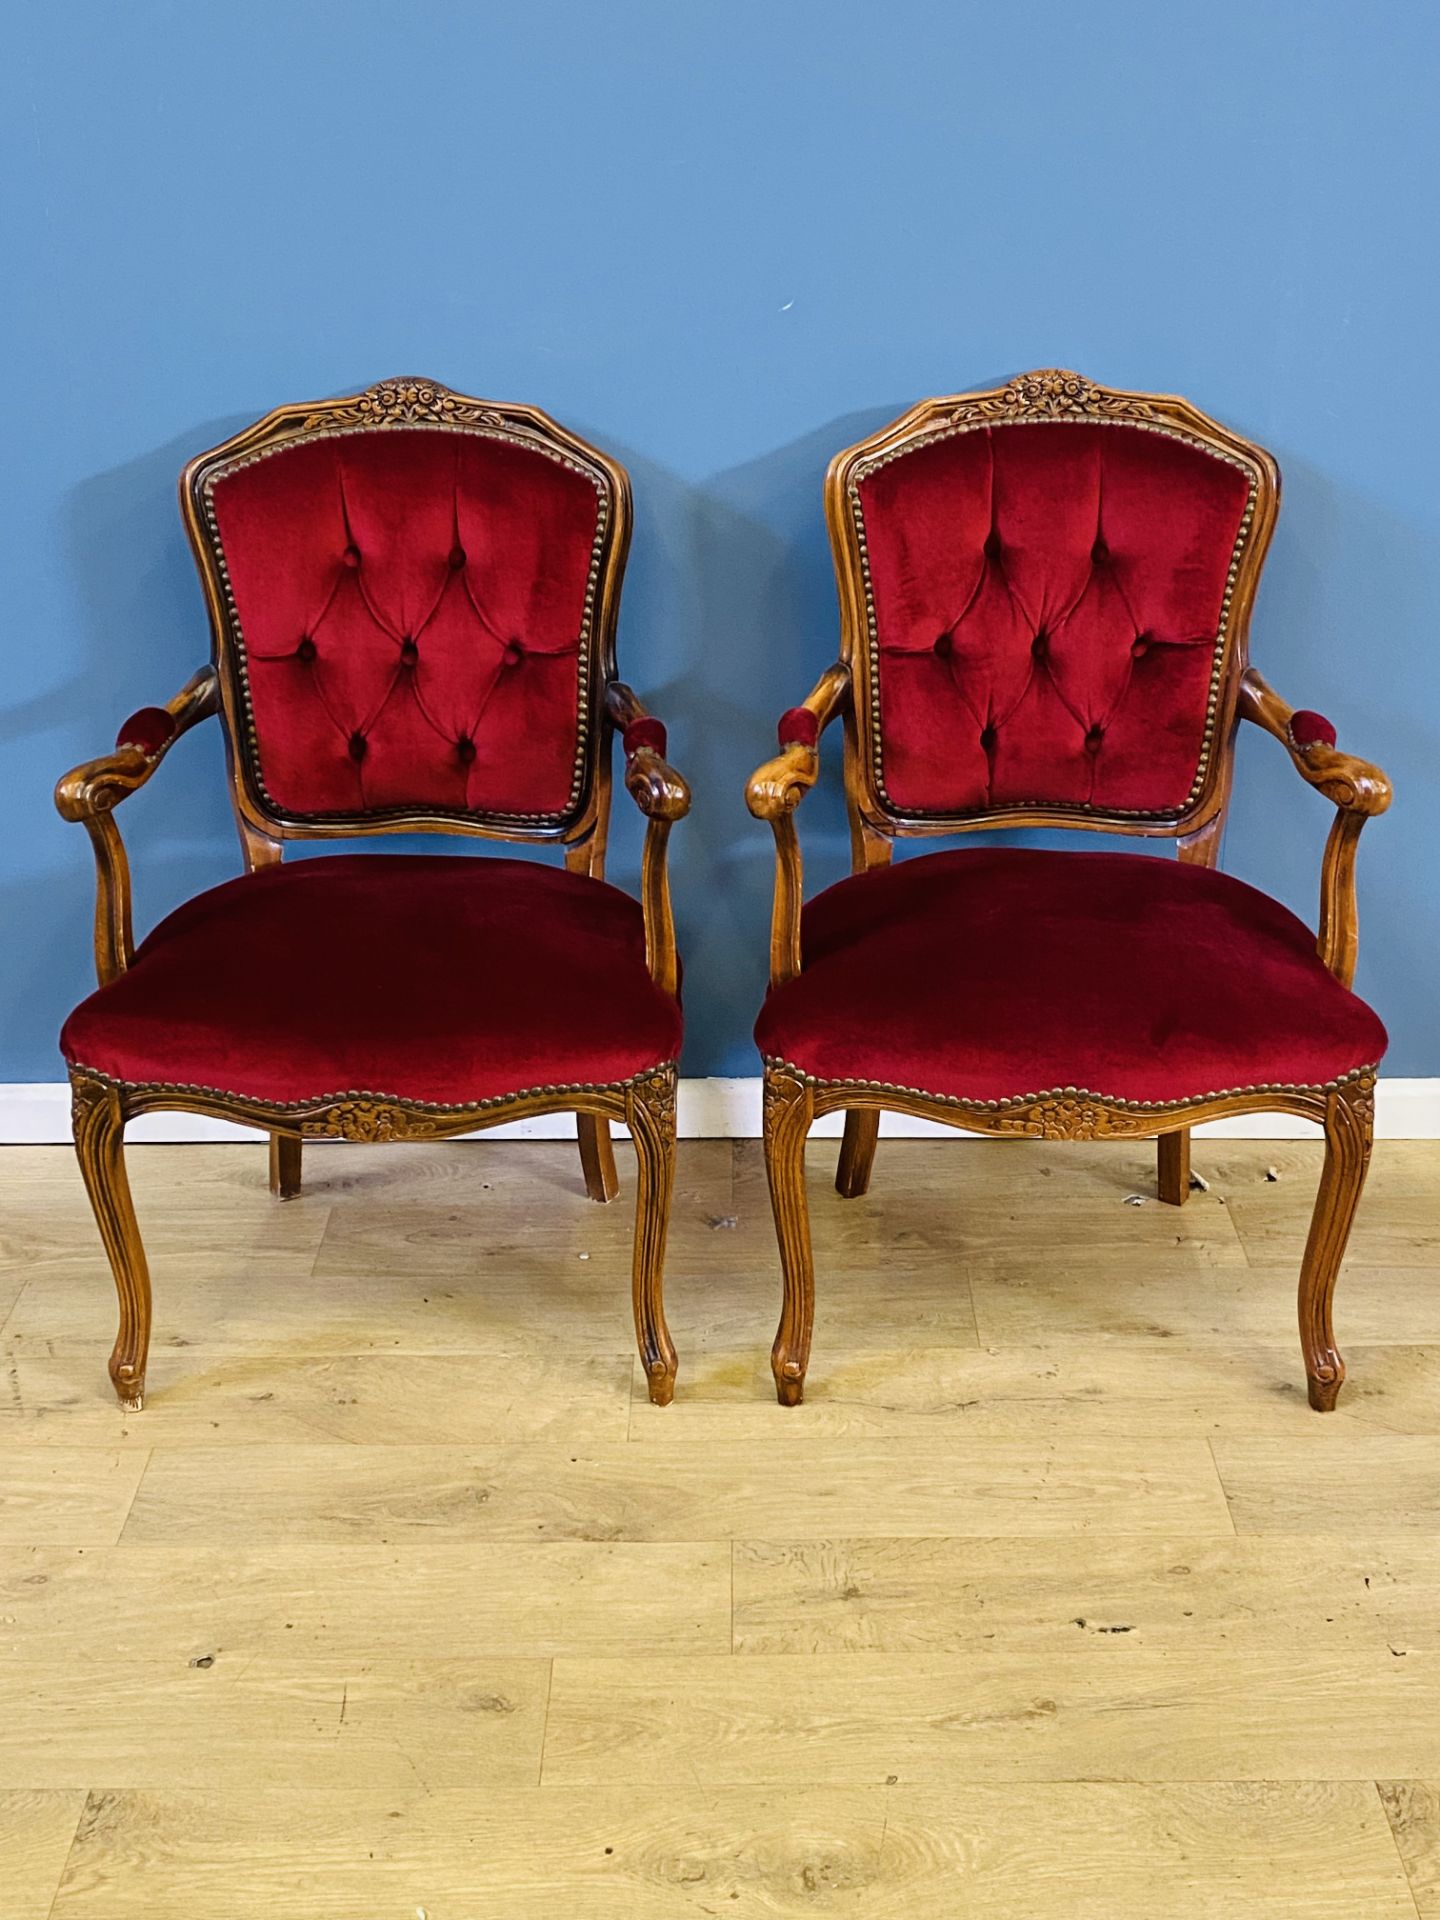 Pair of French style button back elbow chairs